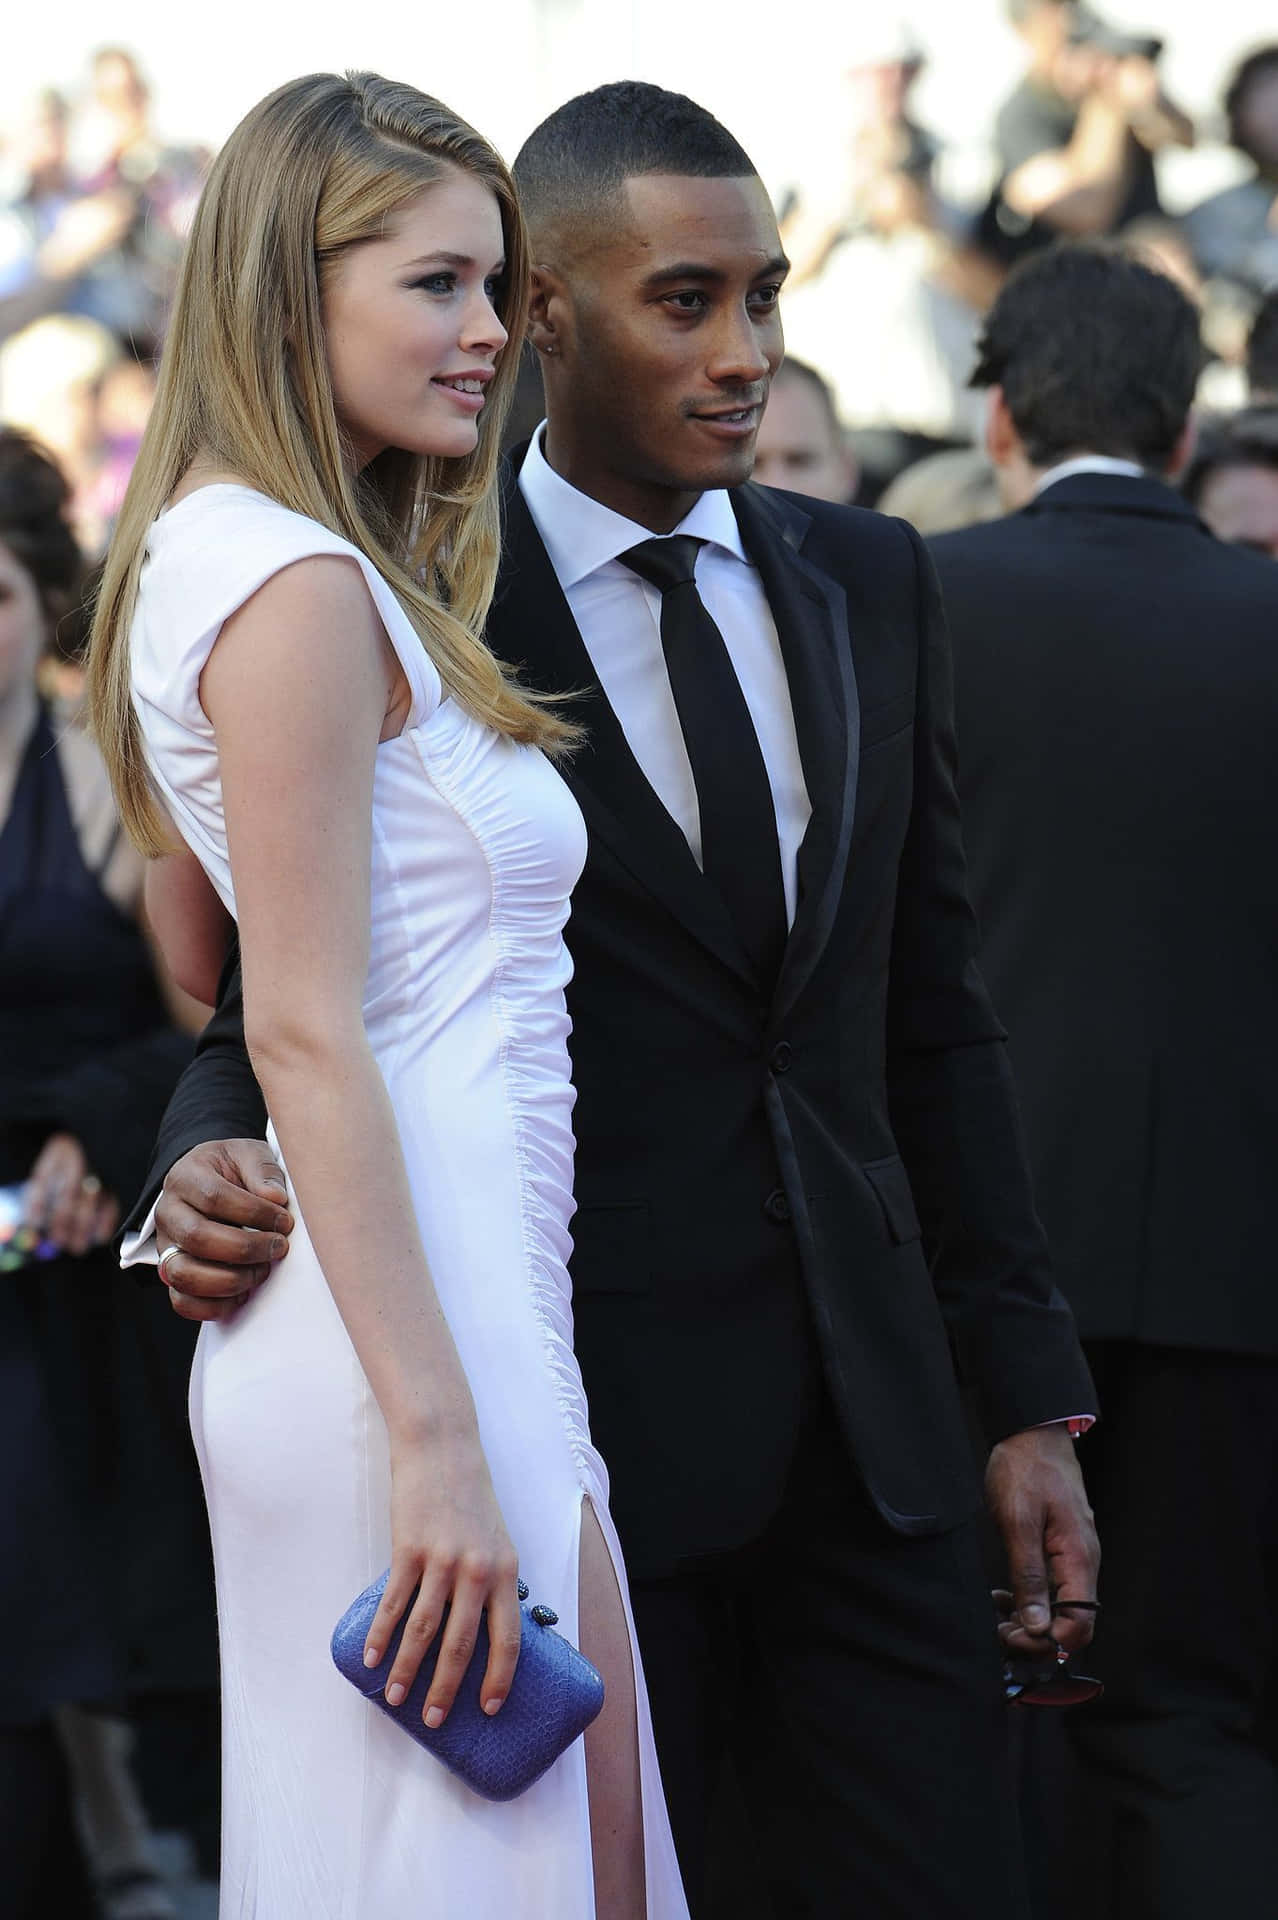 Interracial Couple In Red Carpet Wallpaper